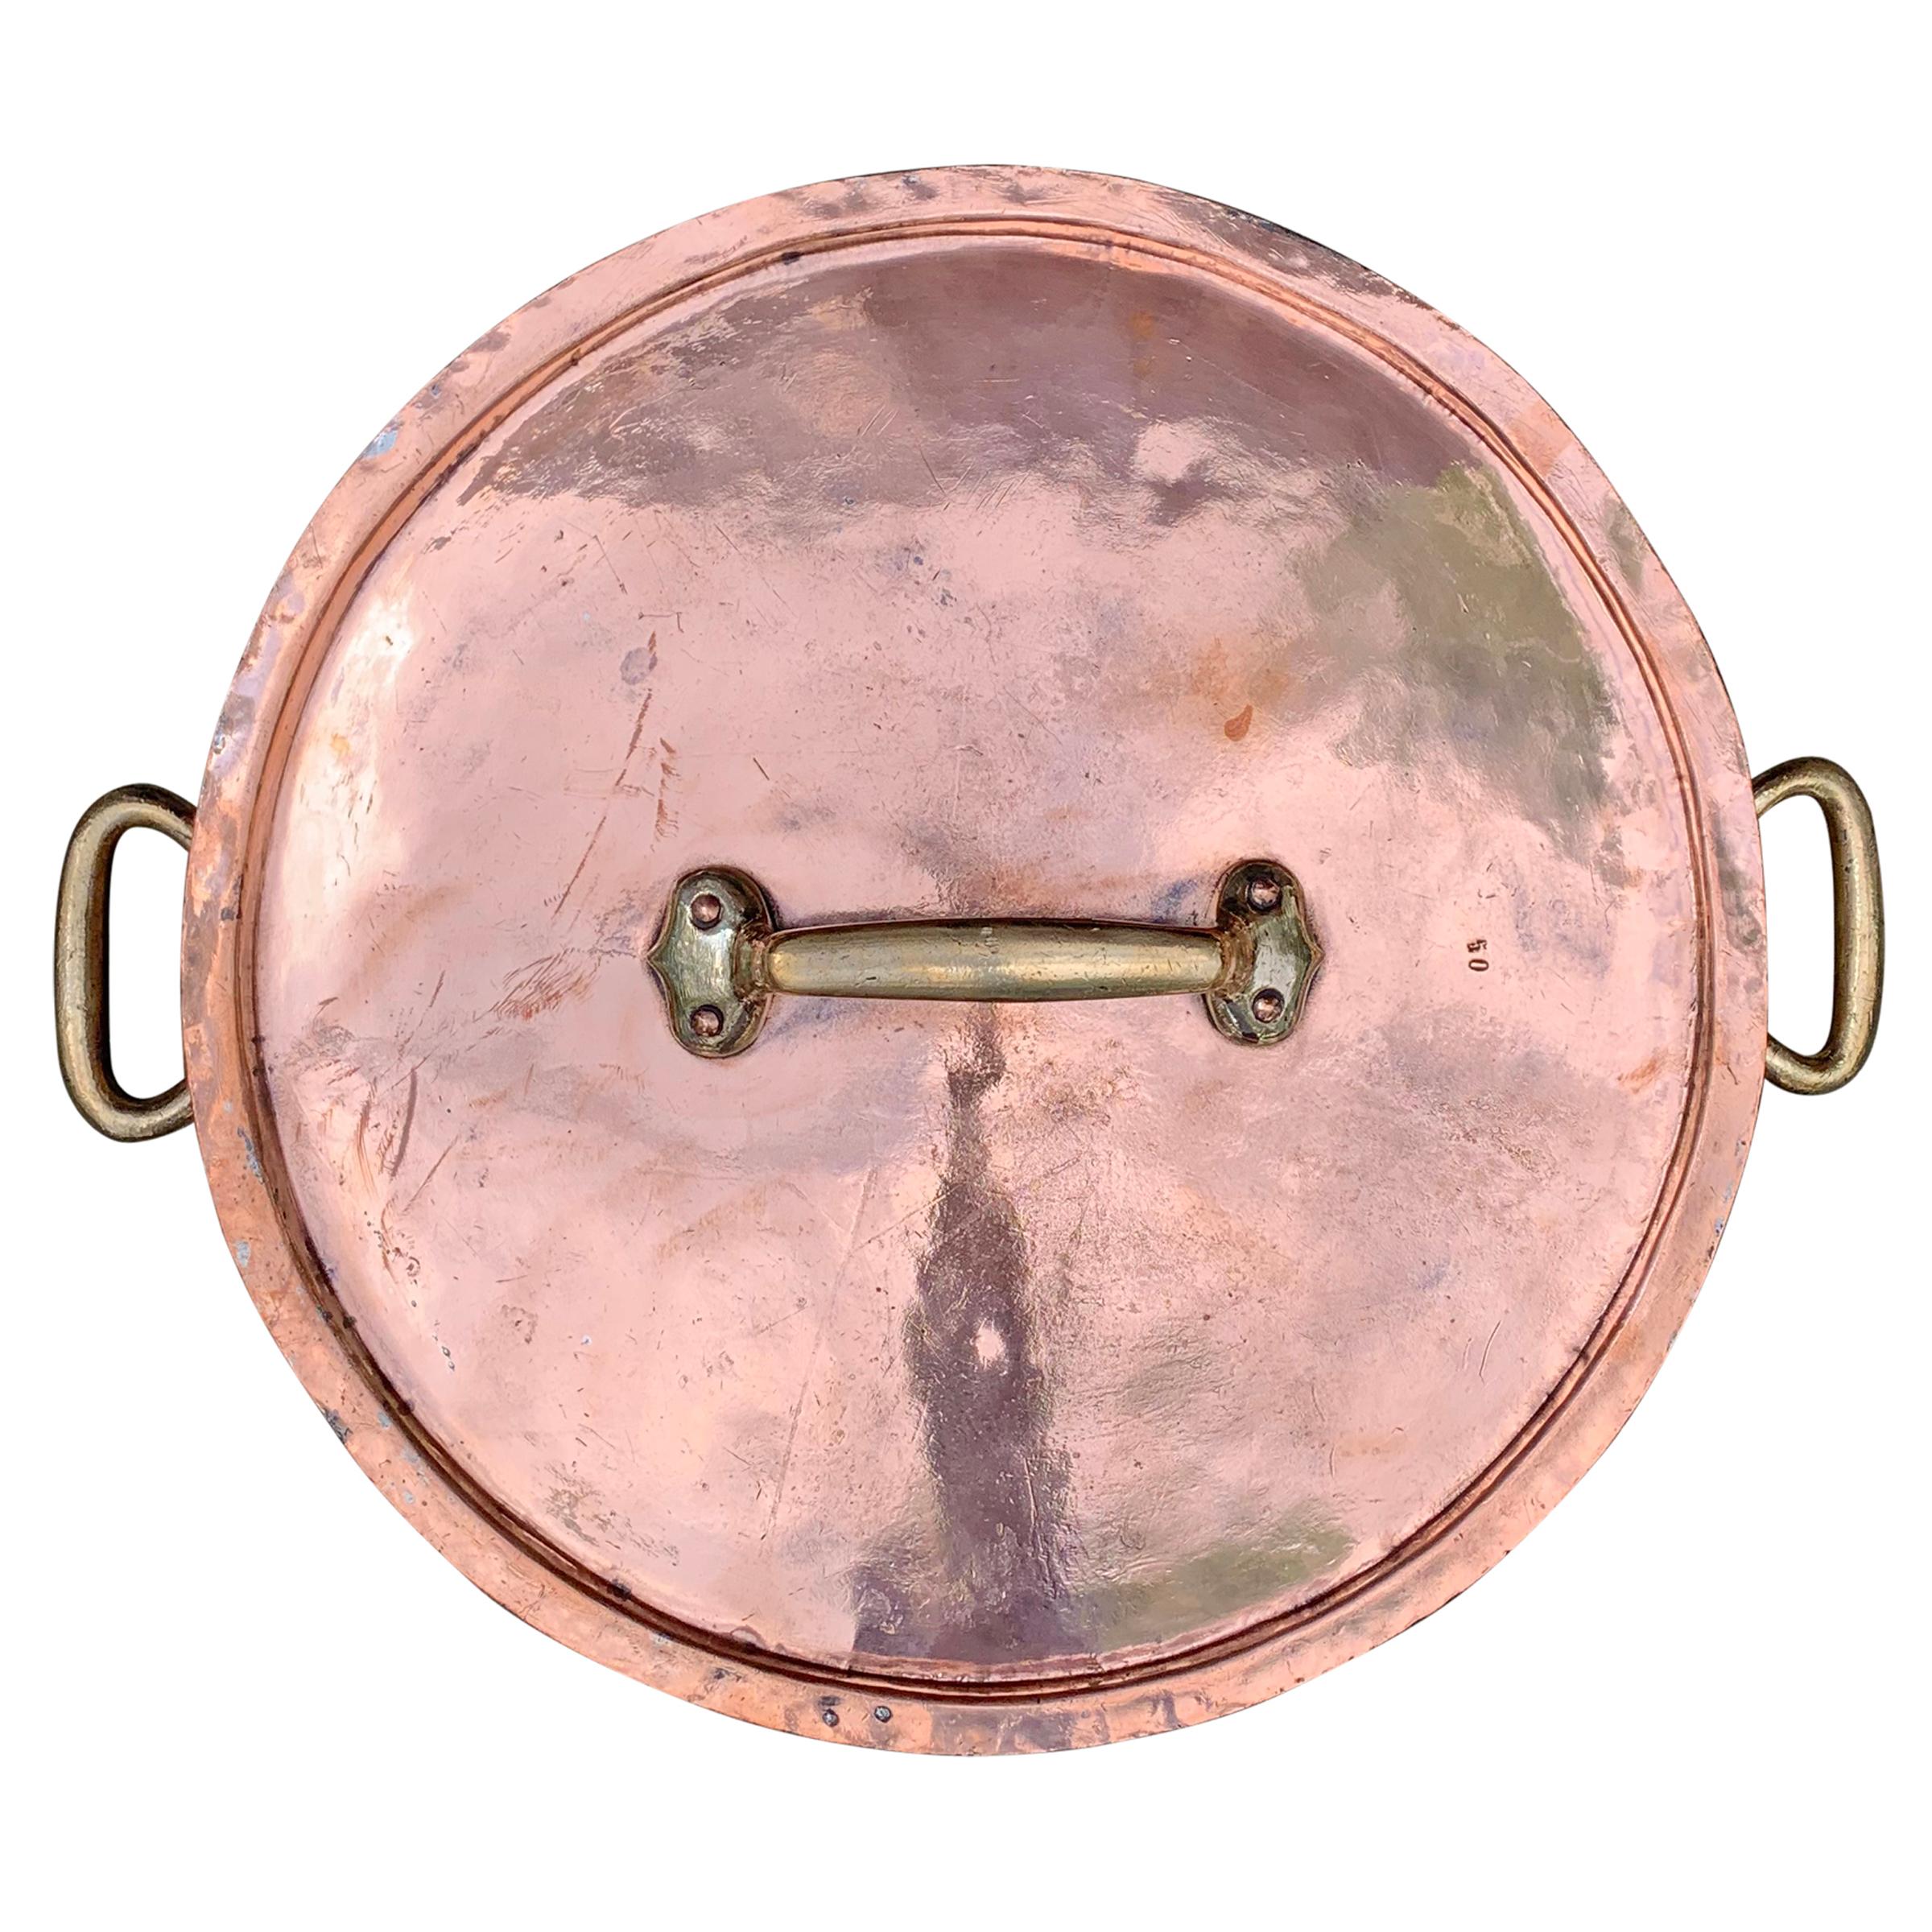 Monumental 65-Quart Copper Pot from a Country House 3